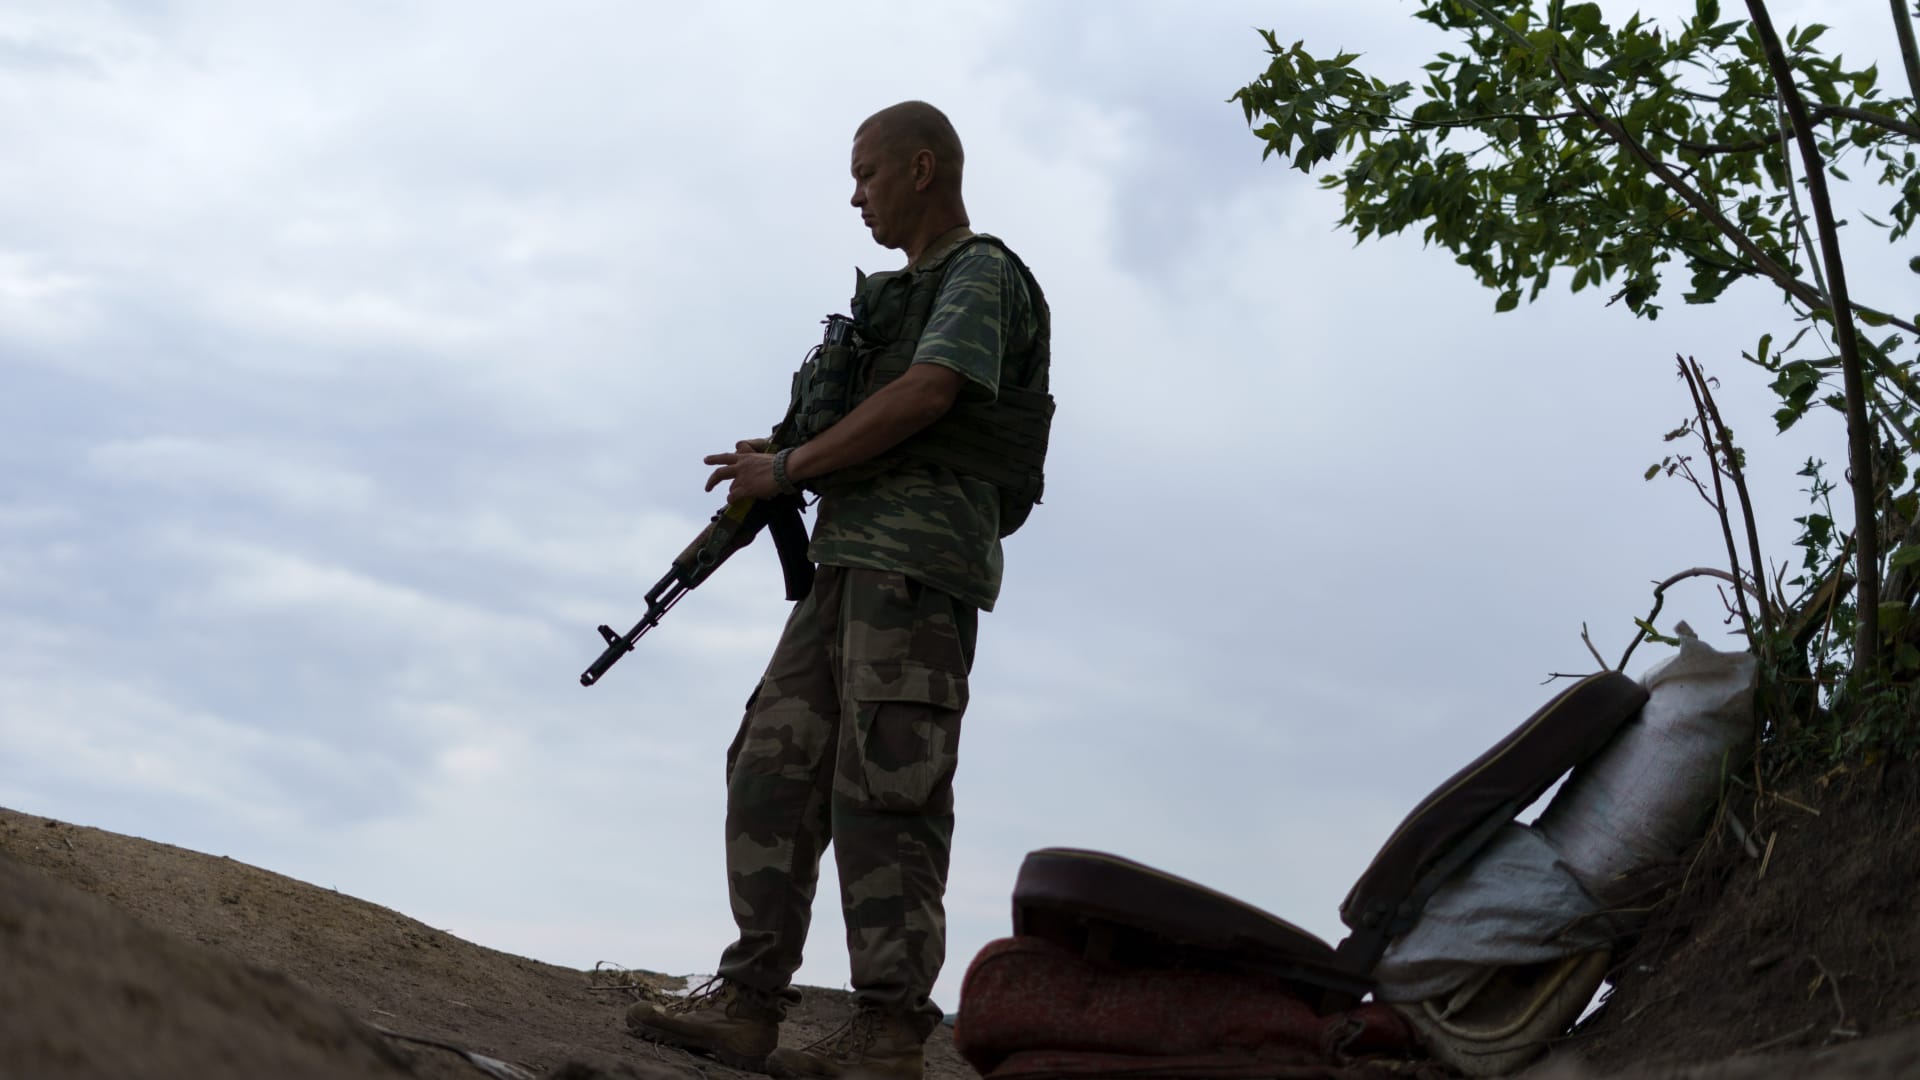 Ukrainian soldier Igor Ryazantsev with the Dnipro-1 regiment keeps watch outside his tent during a period of relative calm around their position near Sloviansk, Donetsk region, eastern Ukraine, Friday, Aug. 5, 2022. Members of the unit believe a Russian advance could be impending with the aim of seizing the strategic city.